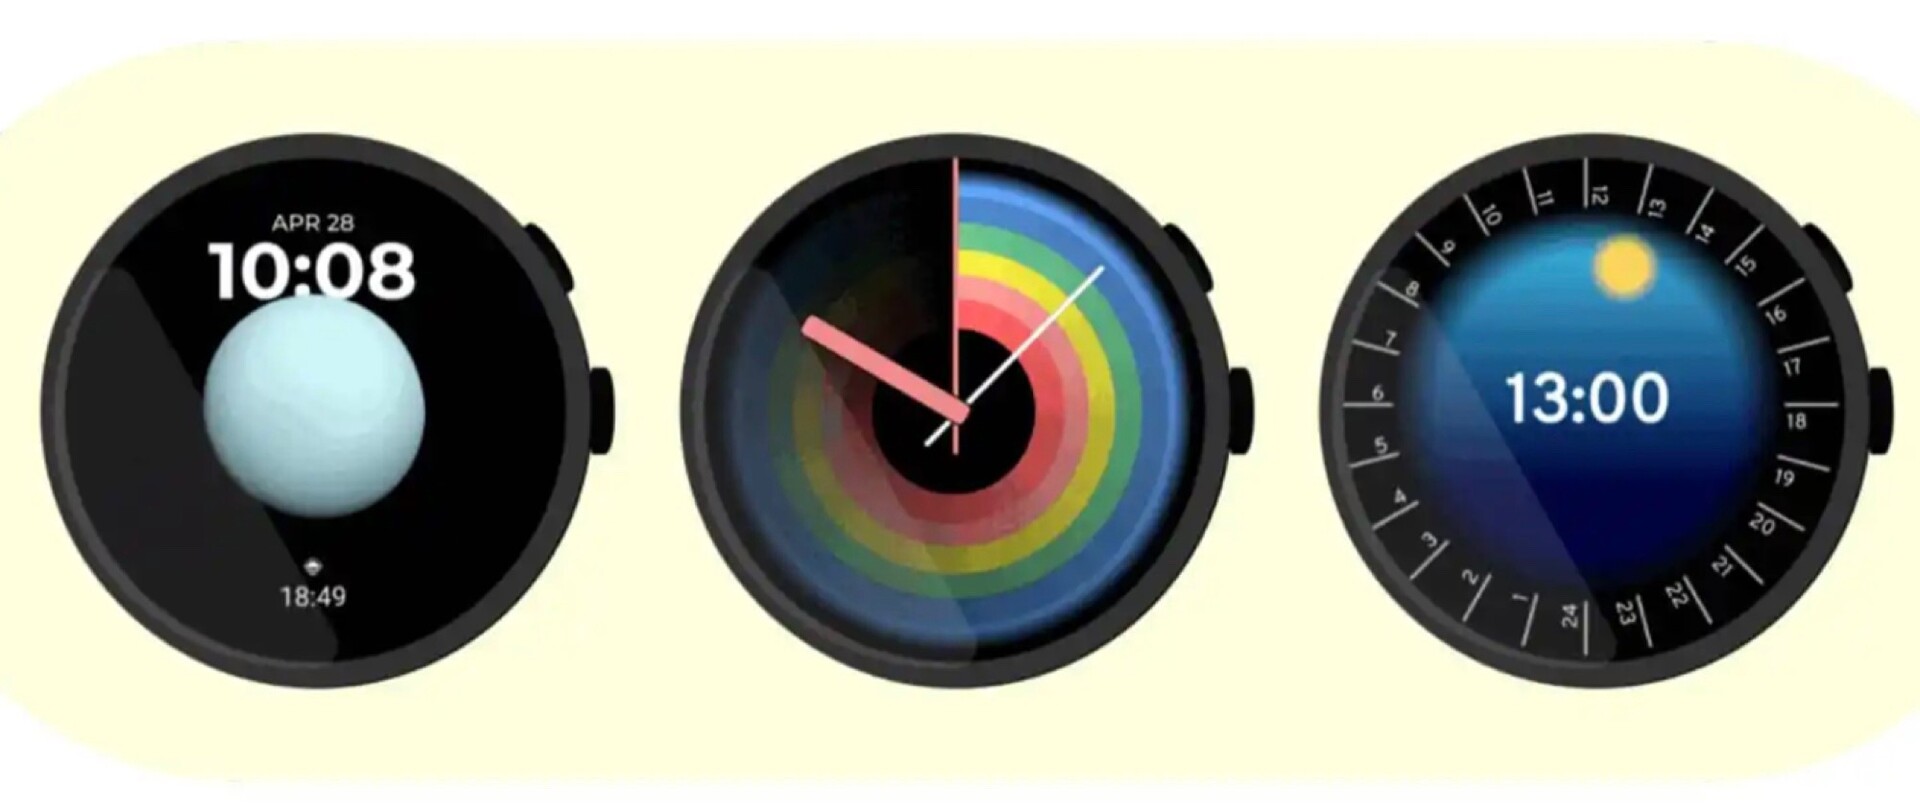 Wear OS 4: A Leap Towards Enhanced Battery Life and Improved User